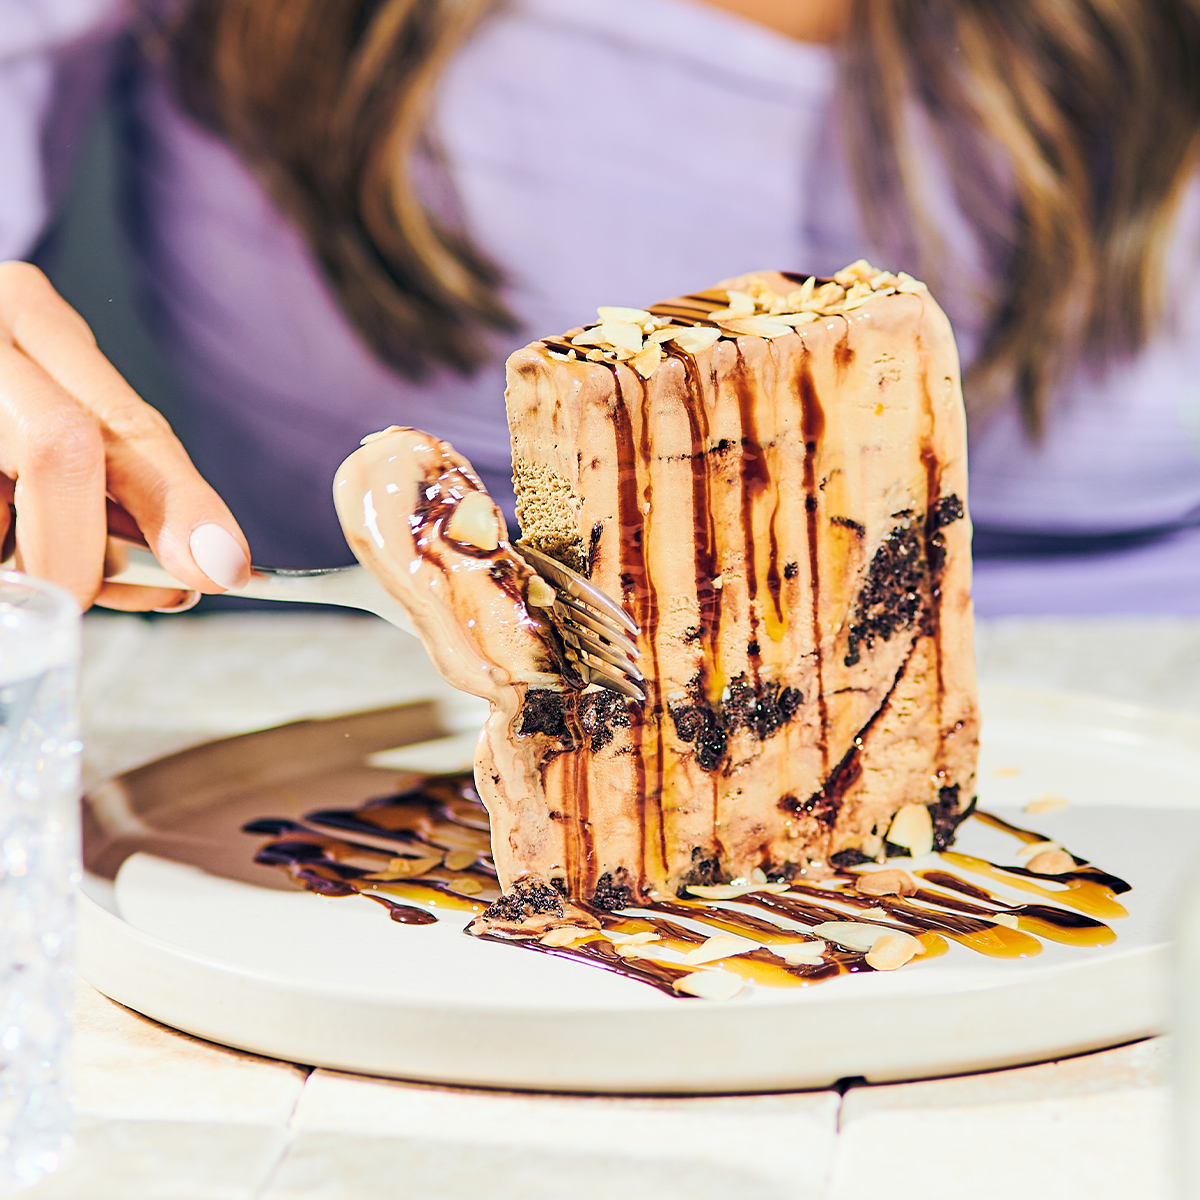 person cutting ice cream cake with chocolate and caramel sauces